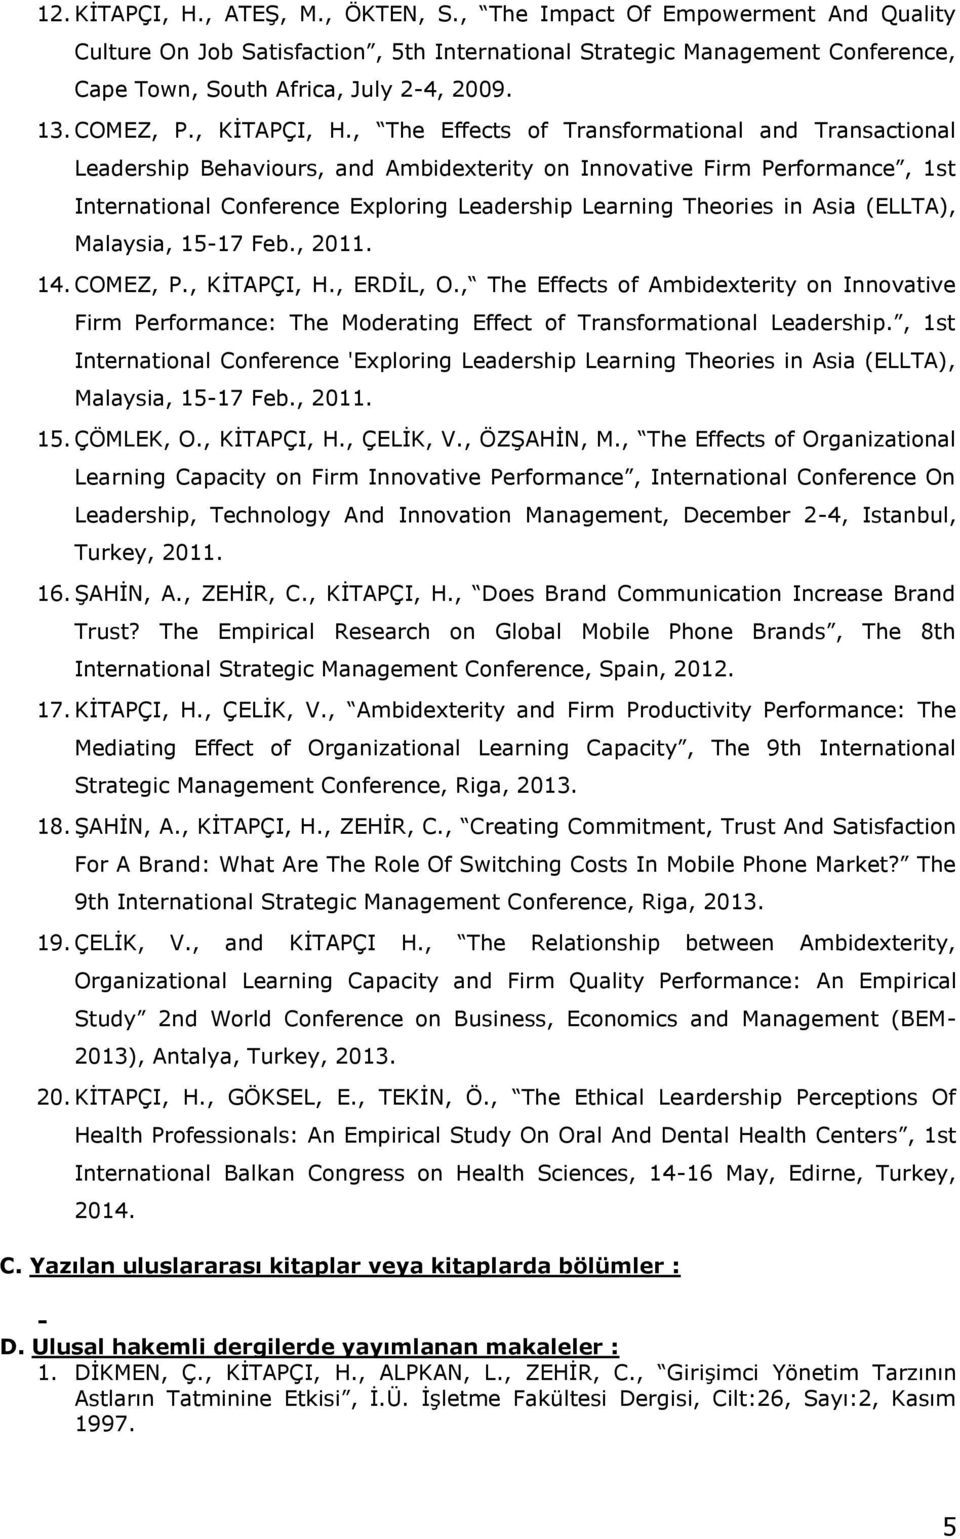 , The Effects of Transformational and Transactional Leadership Behaviours, and Ambidexterity on Innovative Firm Performance, 1st International Conference Exploring Leadership Learning Theories in